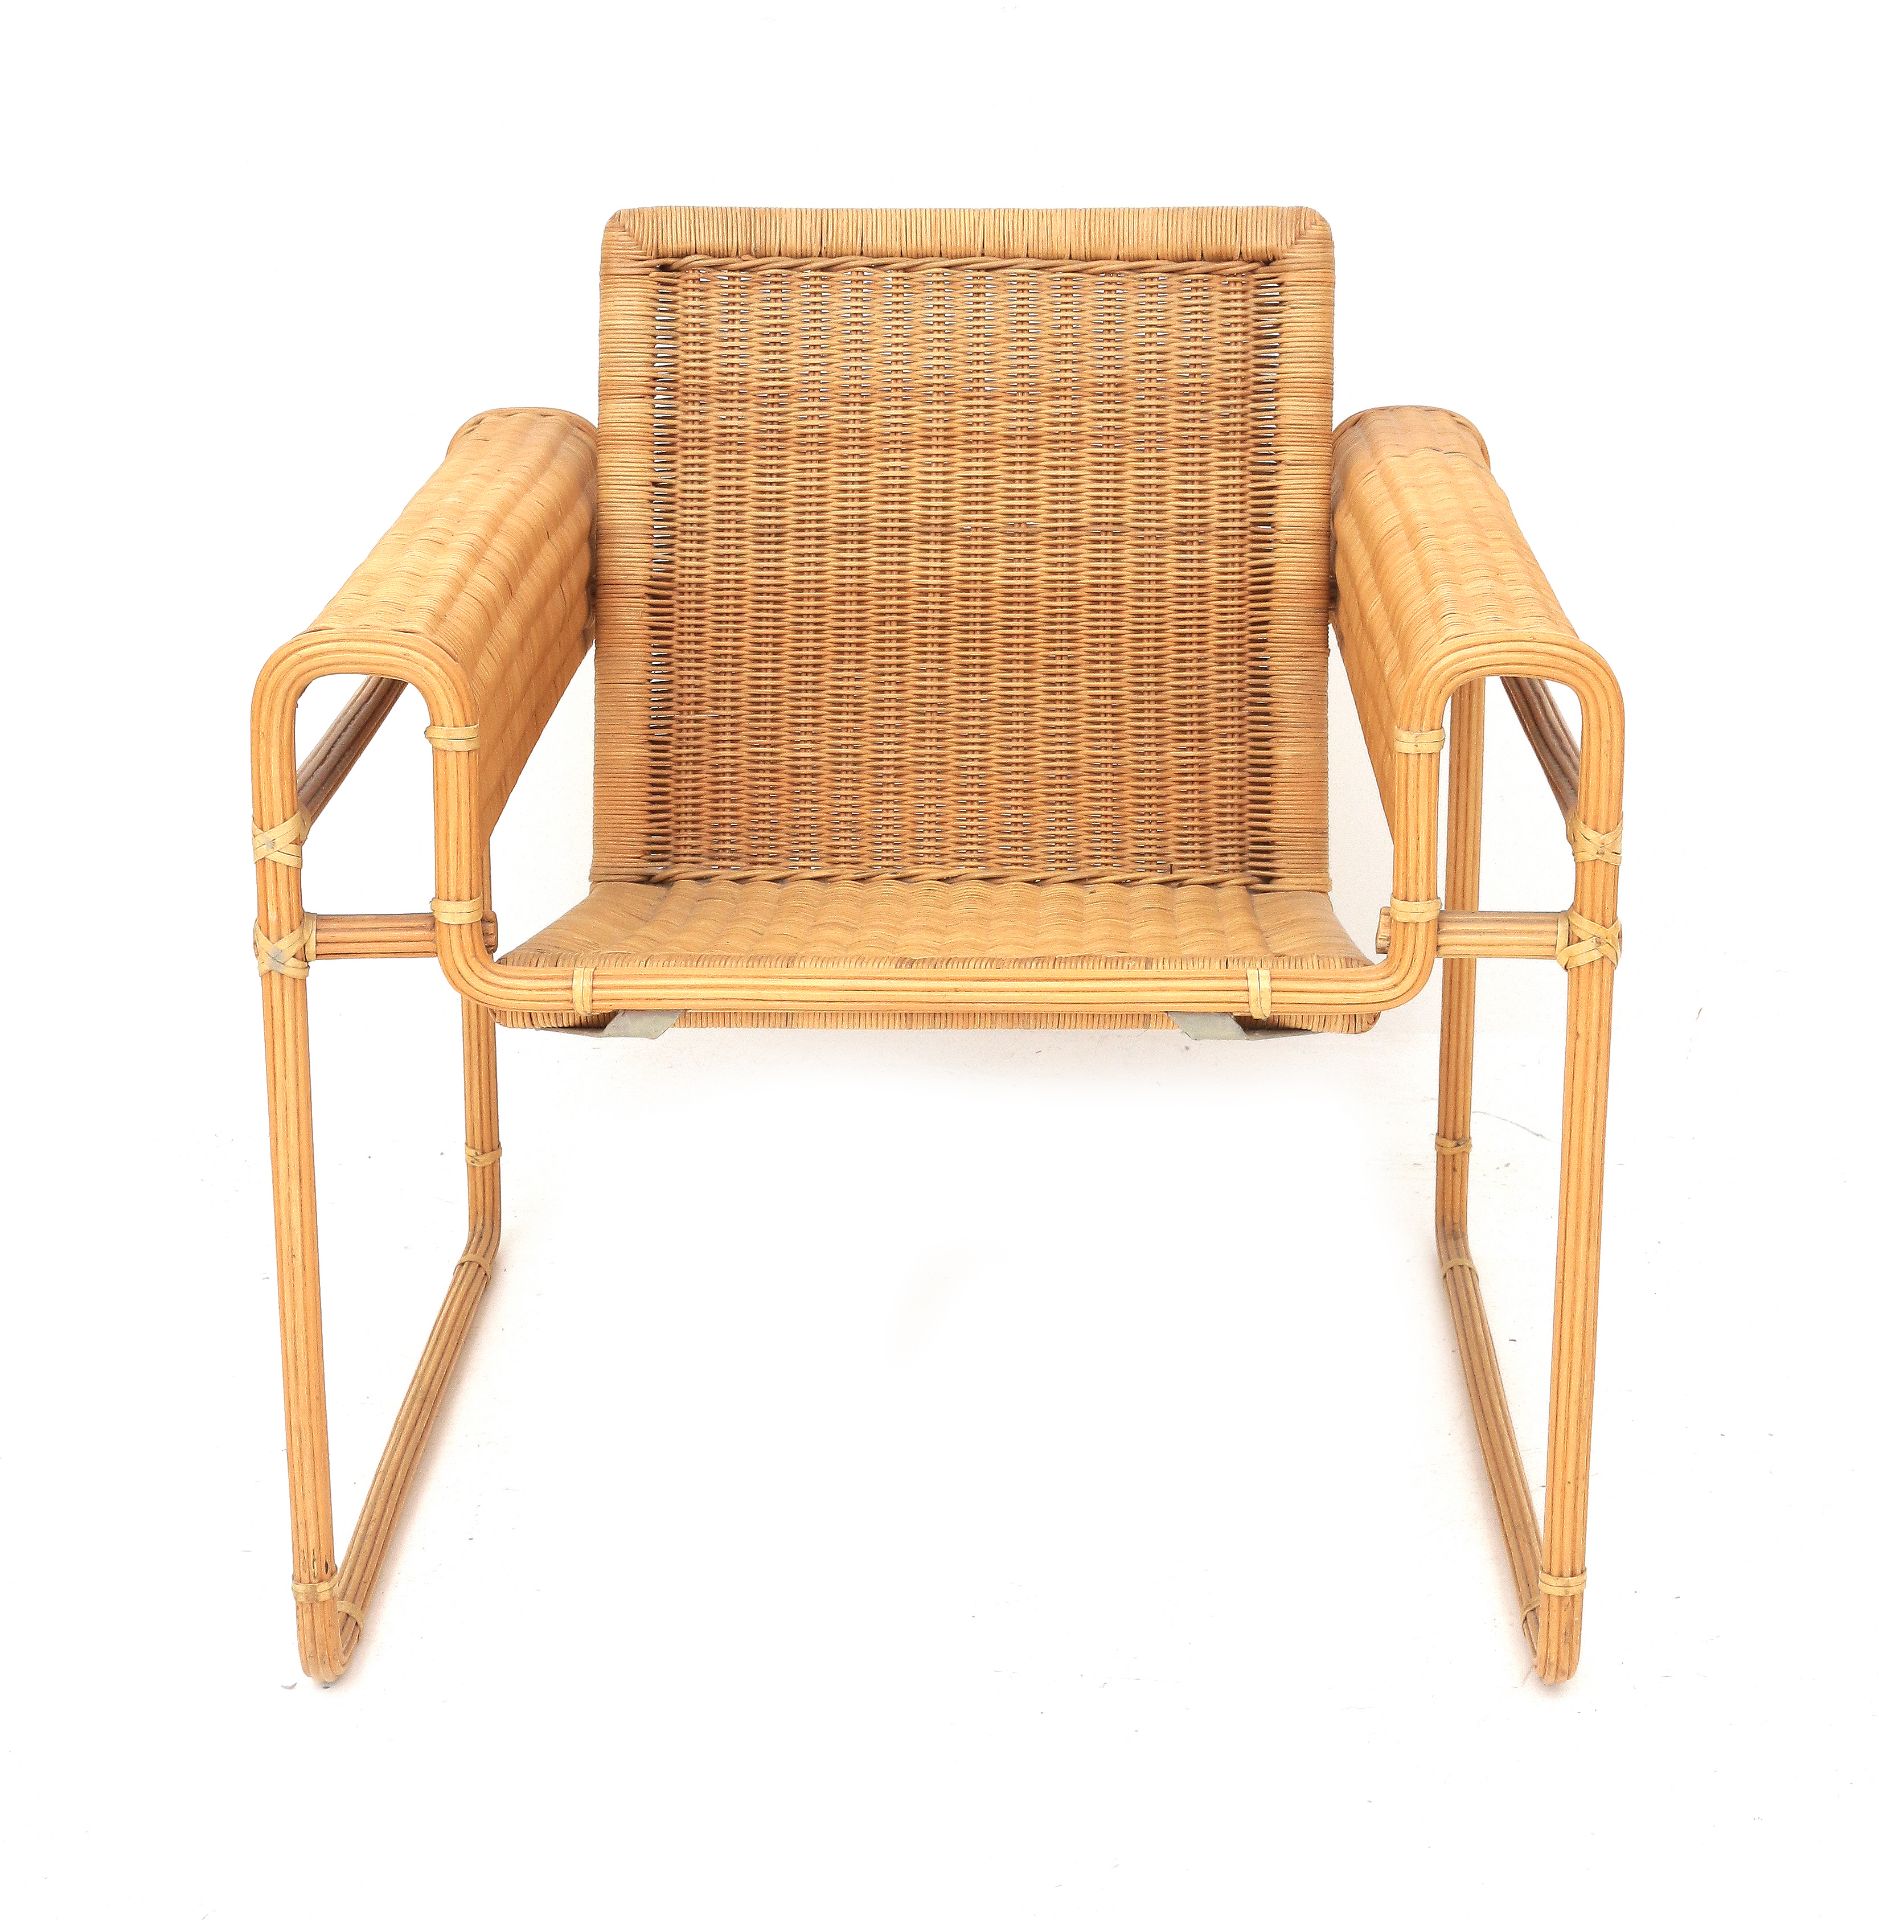 Marcel Breuer (1902-1981) (in the style of) A cane wickered armchair inspired by the Wassily - Bild 2 aus 3